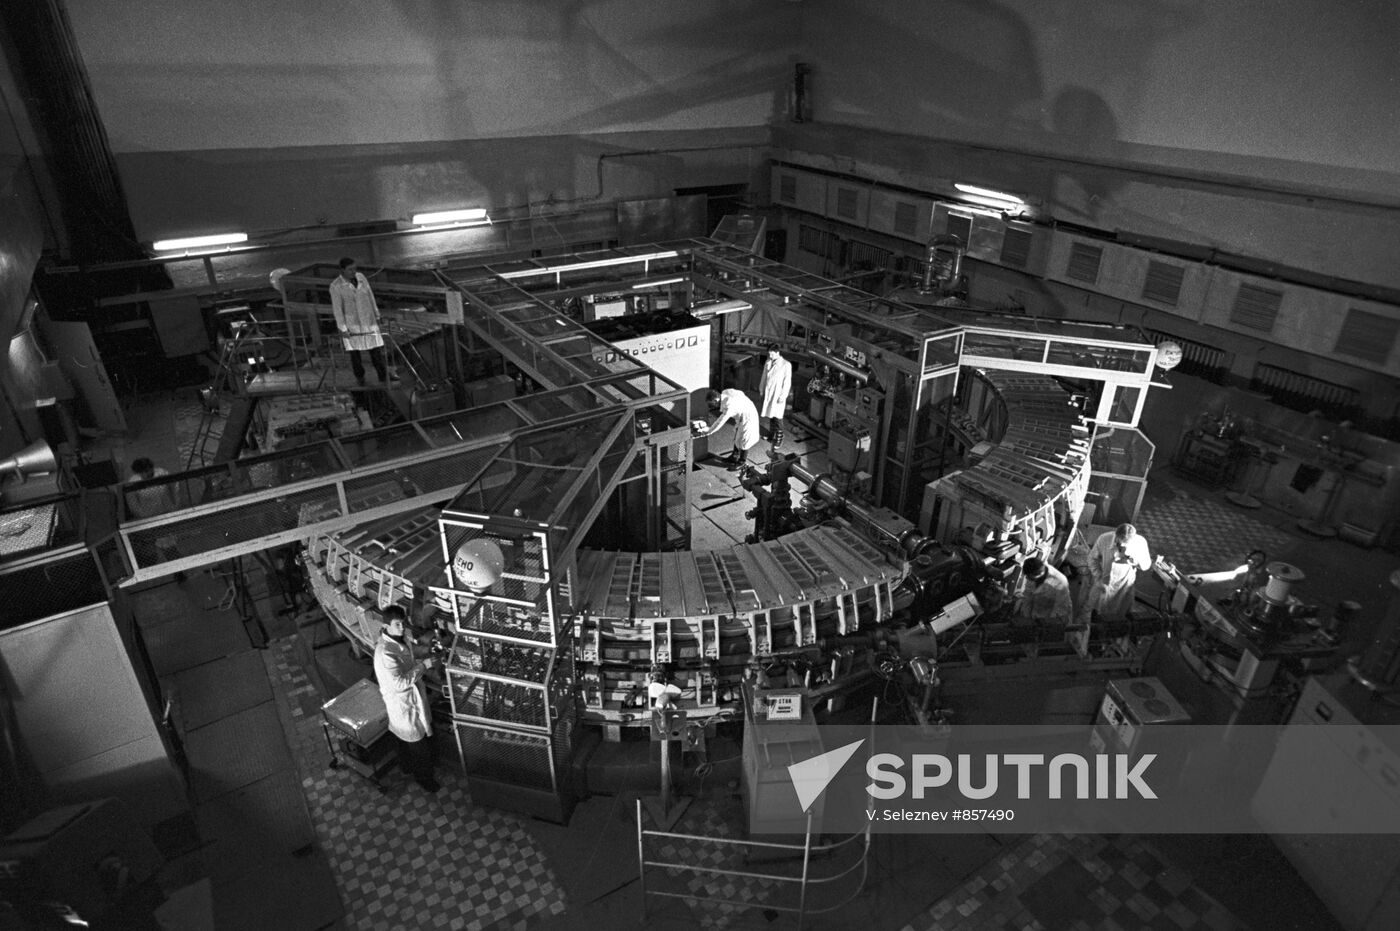 The Sirius electron accelerator in Tomsk